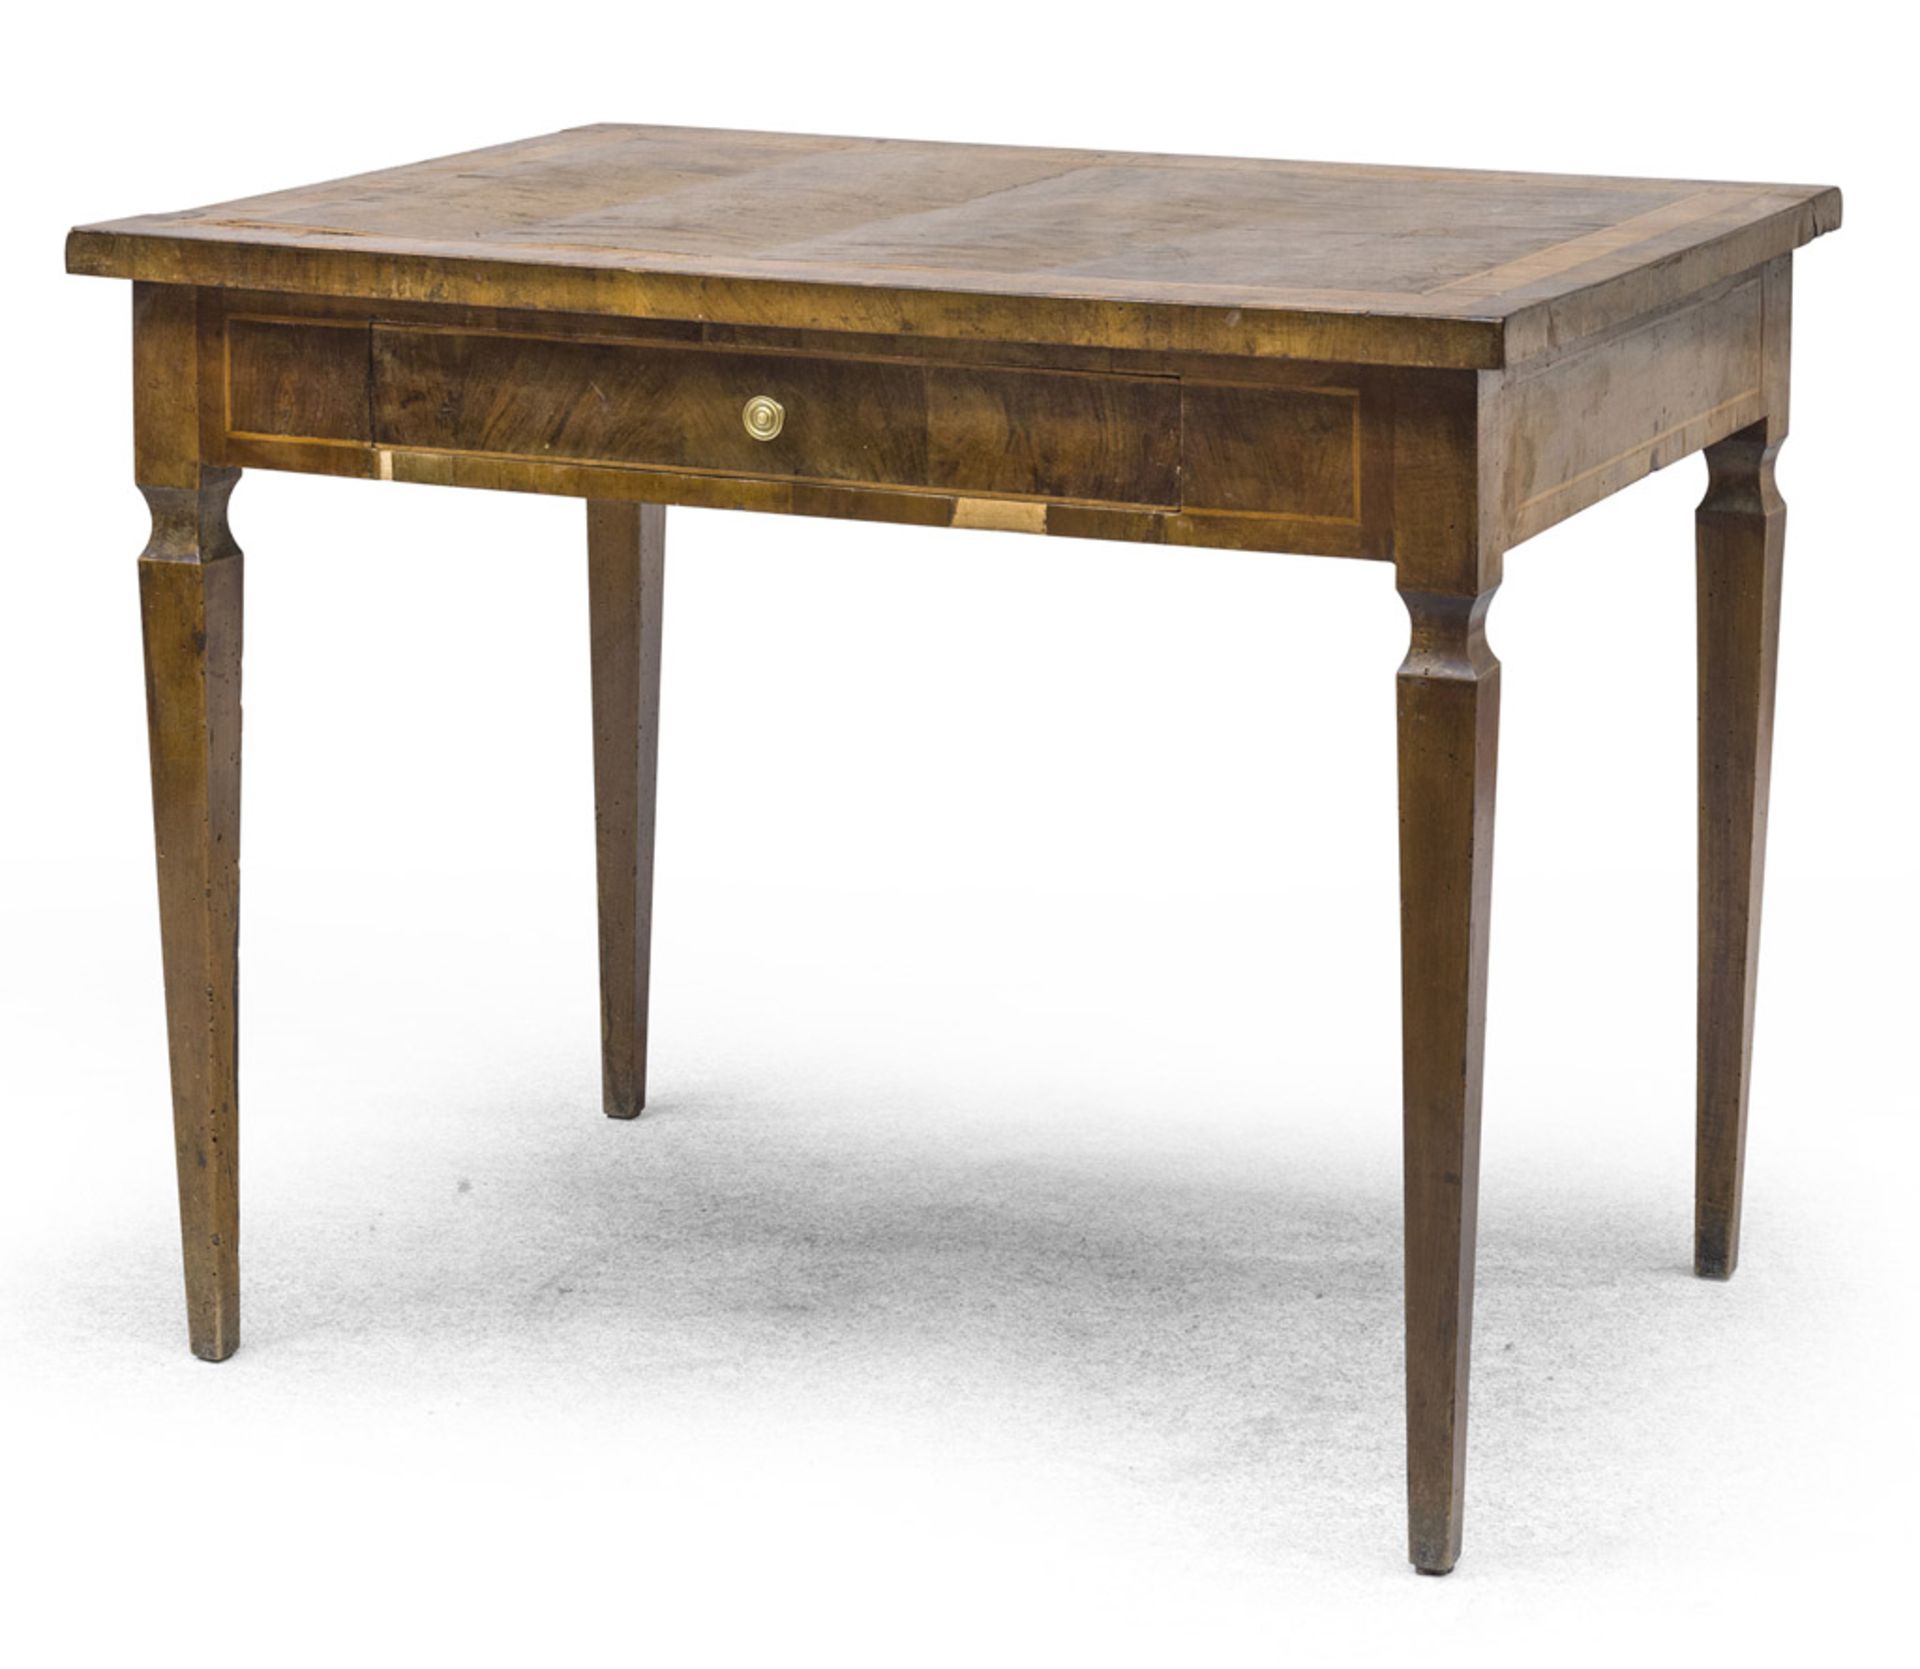 WRITING DESK IN WALNUT, CENTRAL ITALY LATE 18TH CENTURY with reserves in boxwood. Front with one